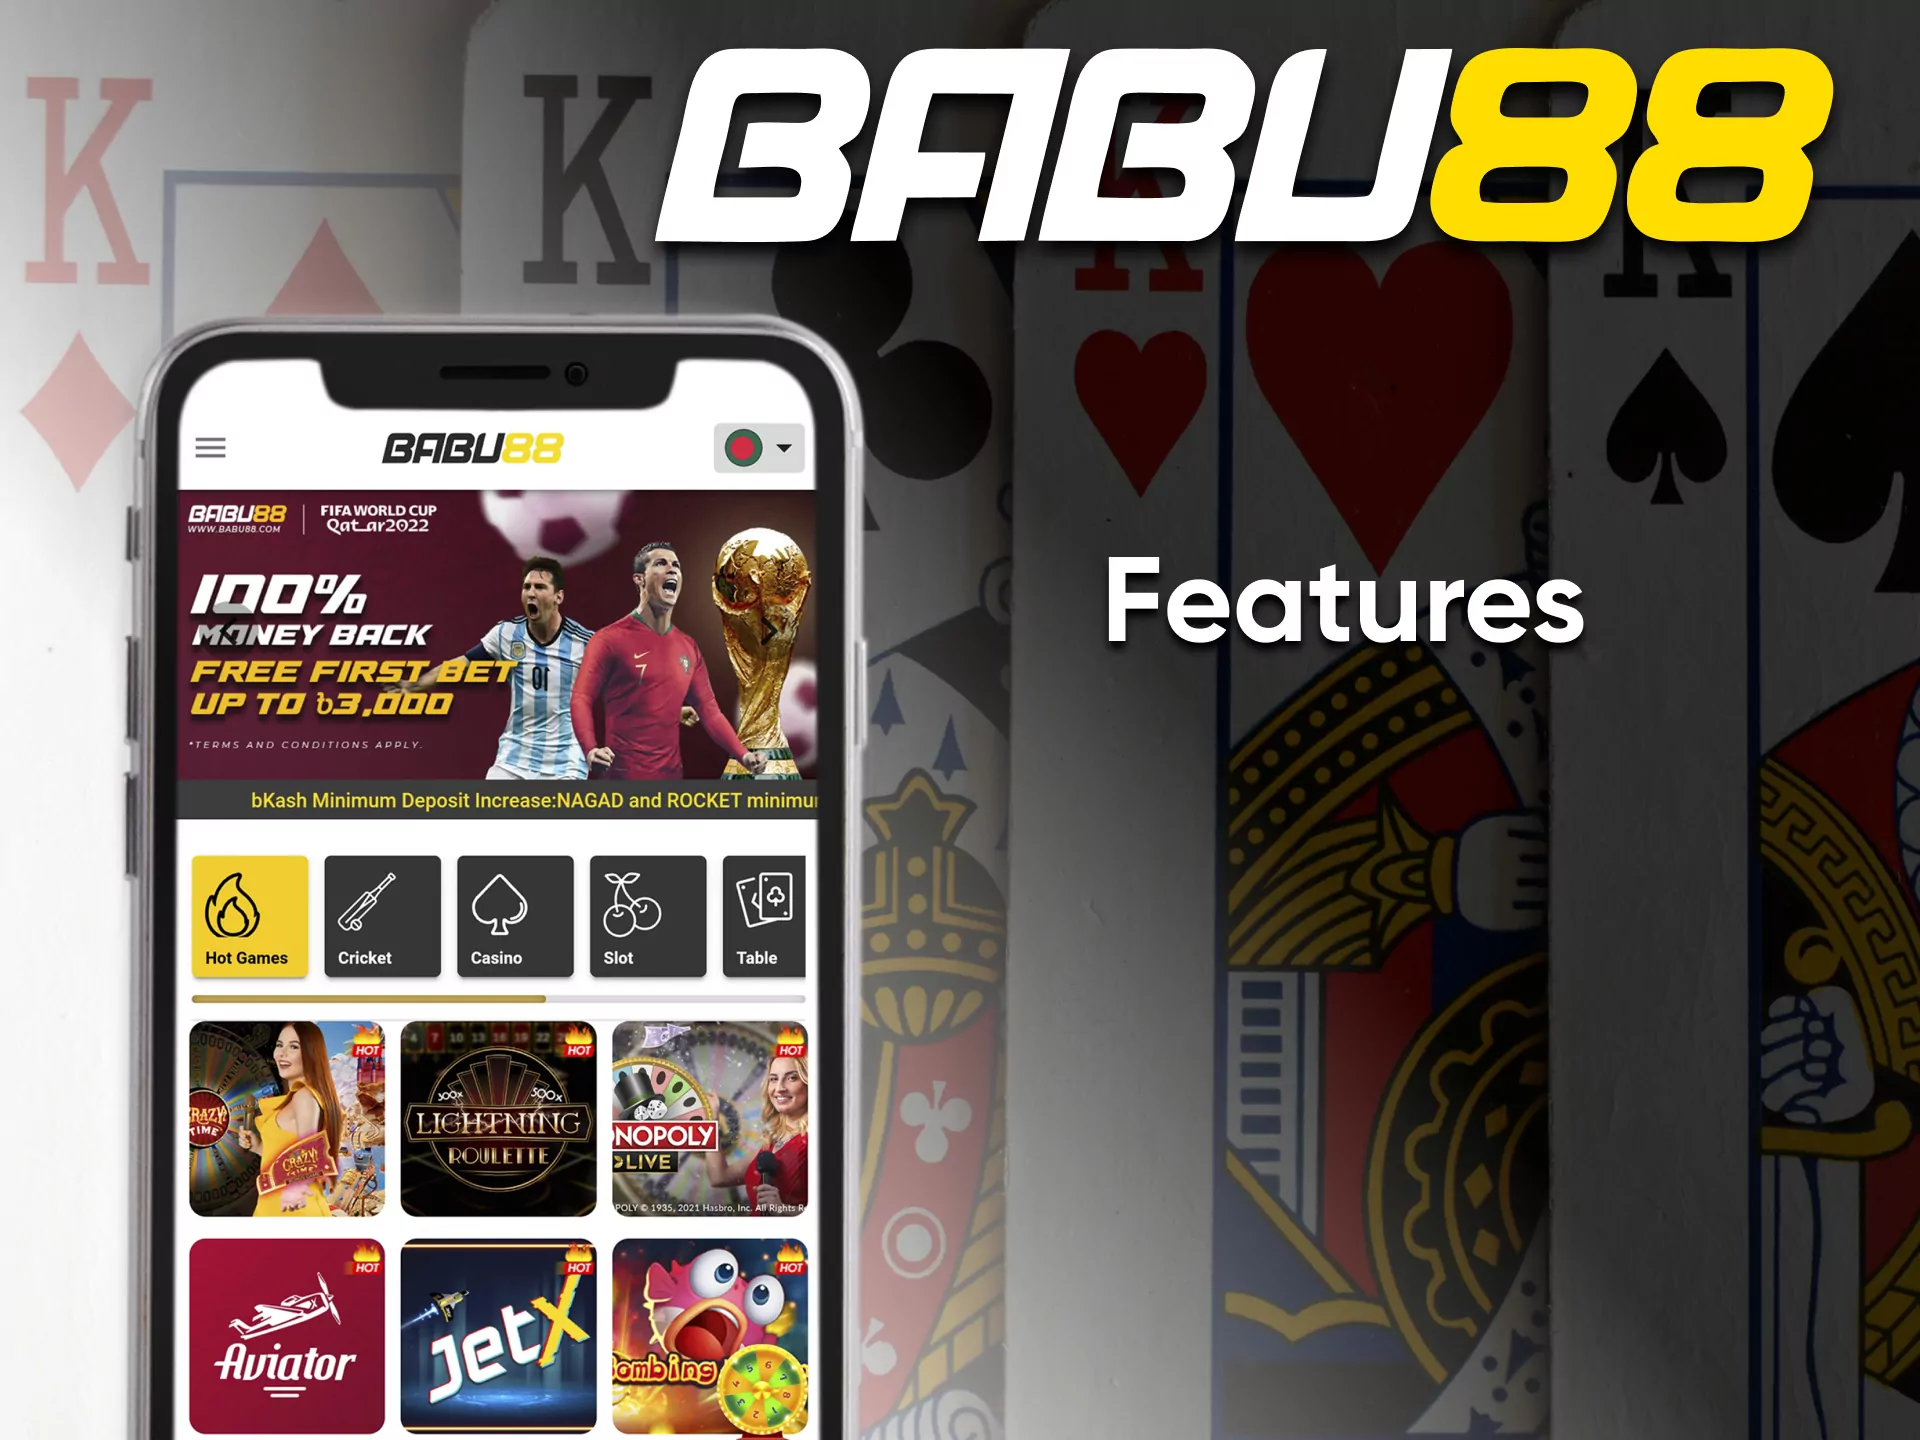 The team improves and creates additional functions for more convenient use of the Babu88 application.